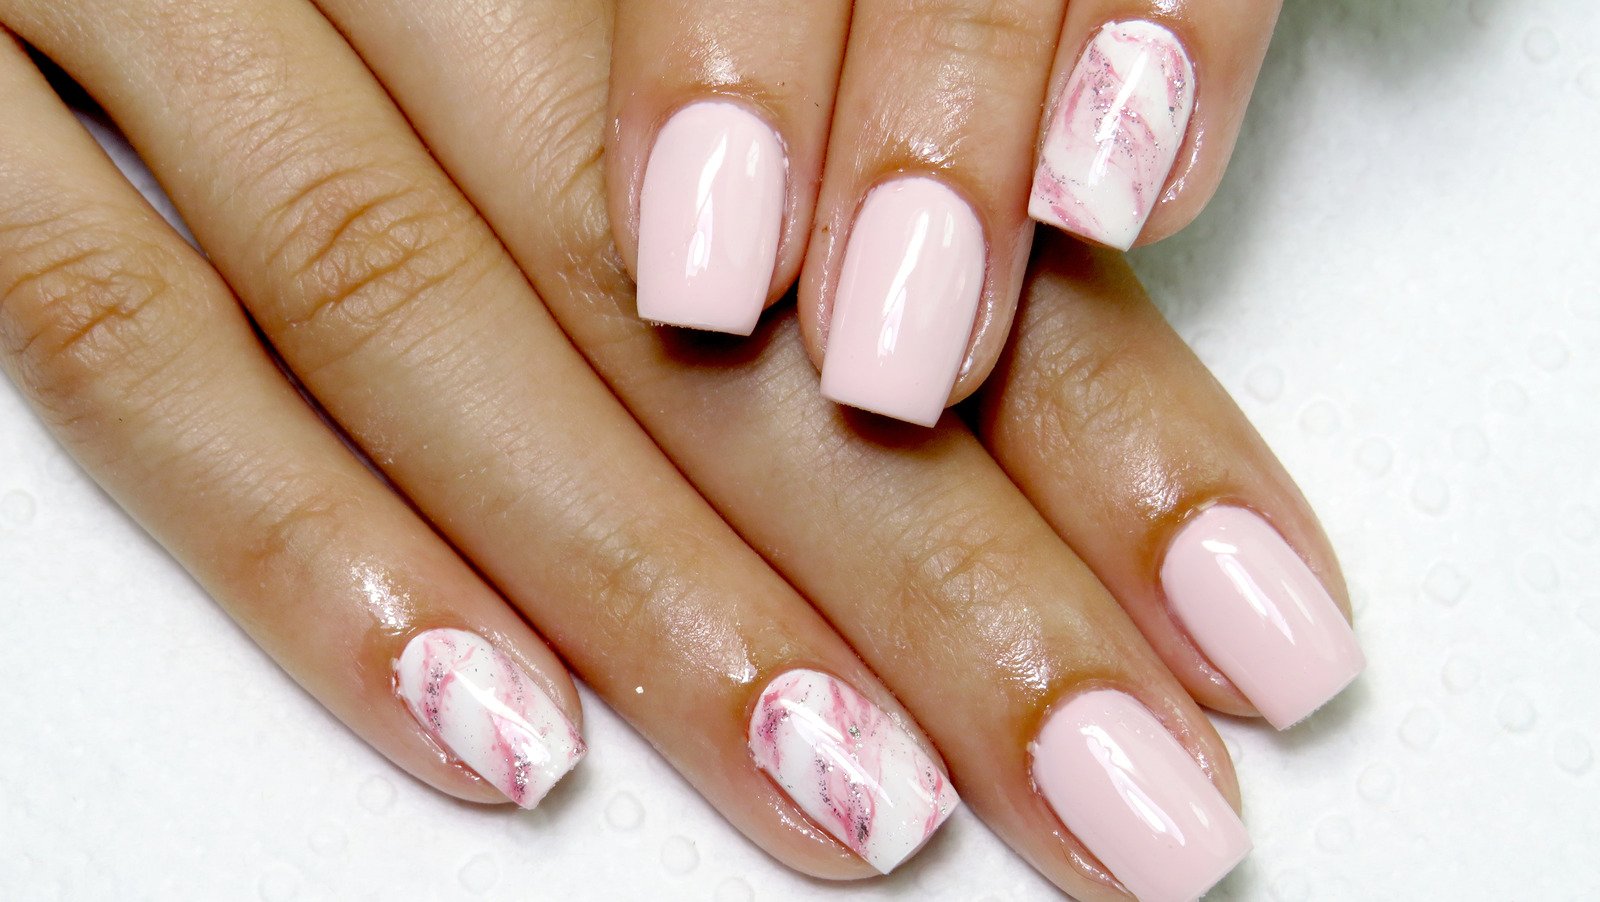 55 Short Nail Designs For Your Next Manicure - Glam